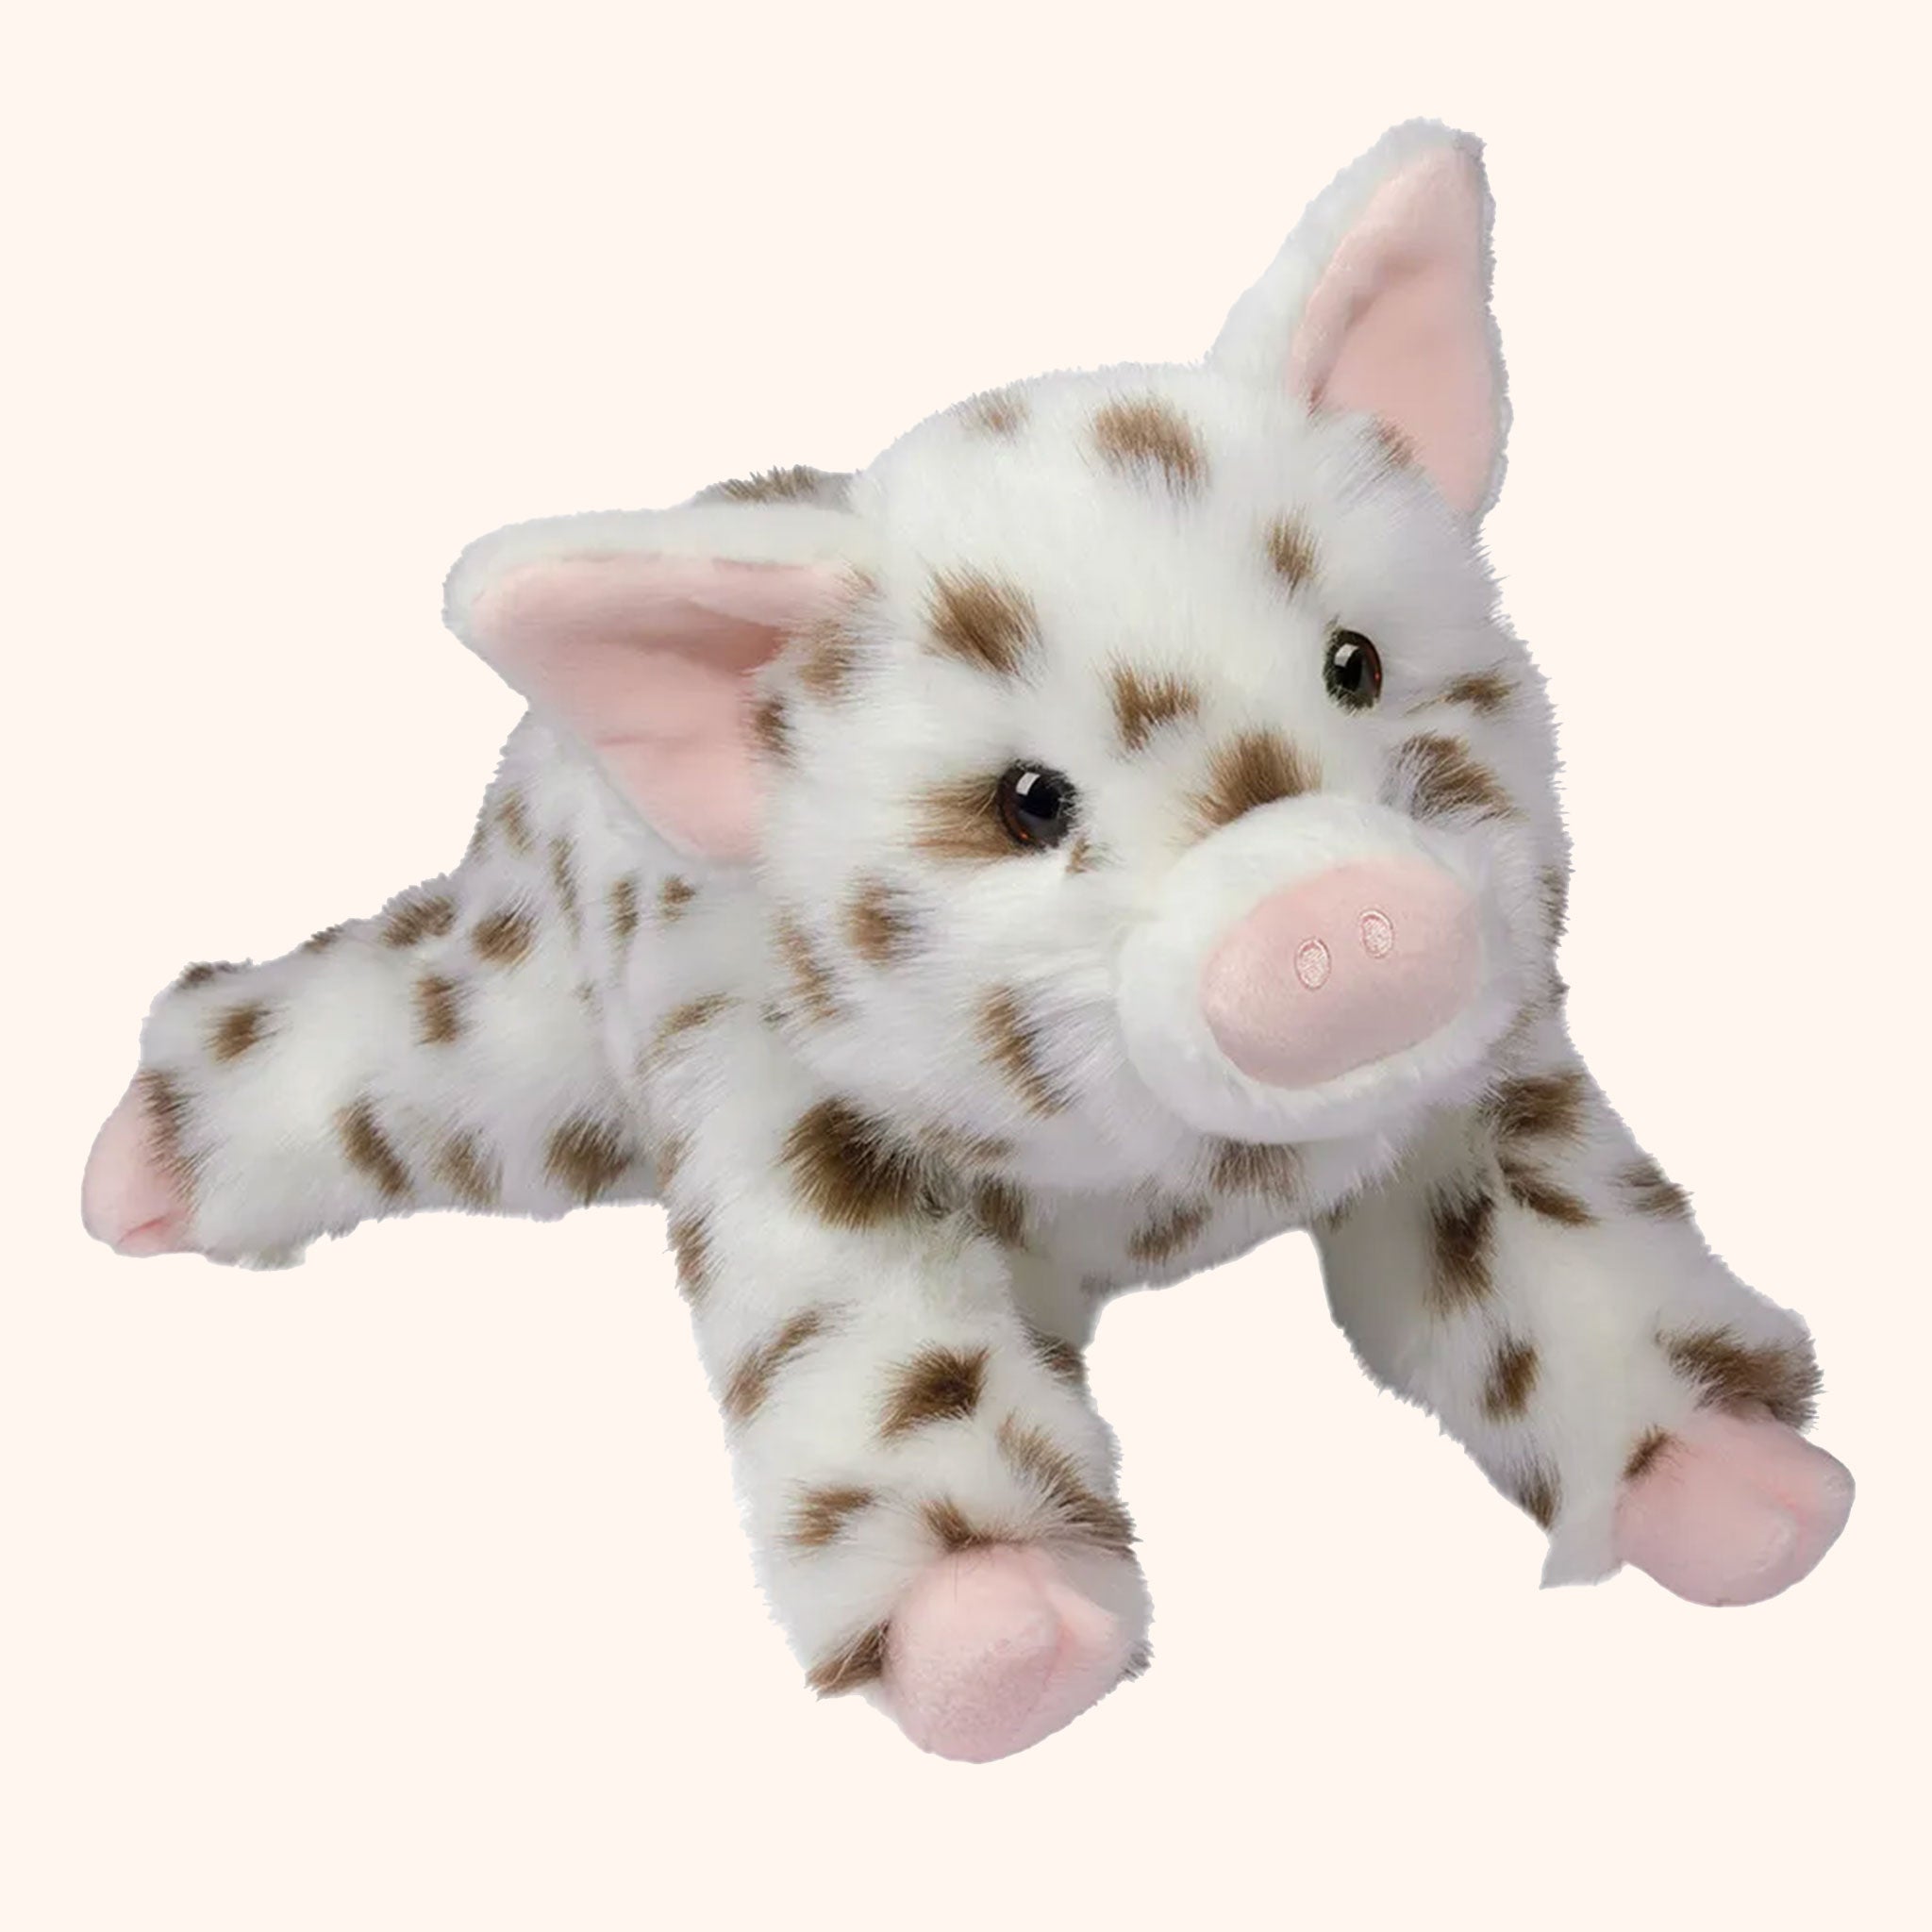 On a white background is a blue and brown stopped pig stuffed animal. 